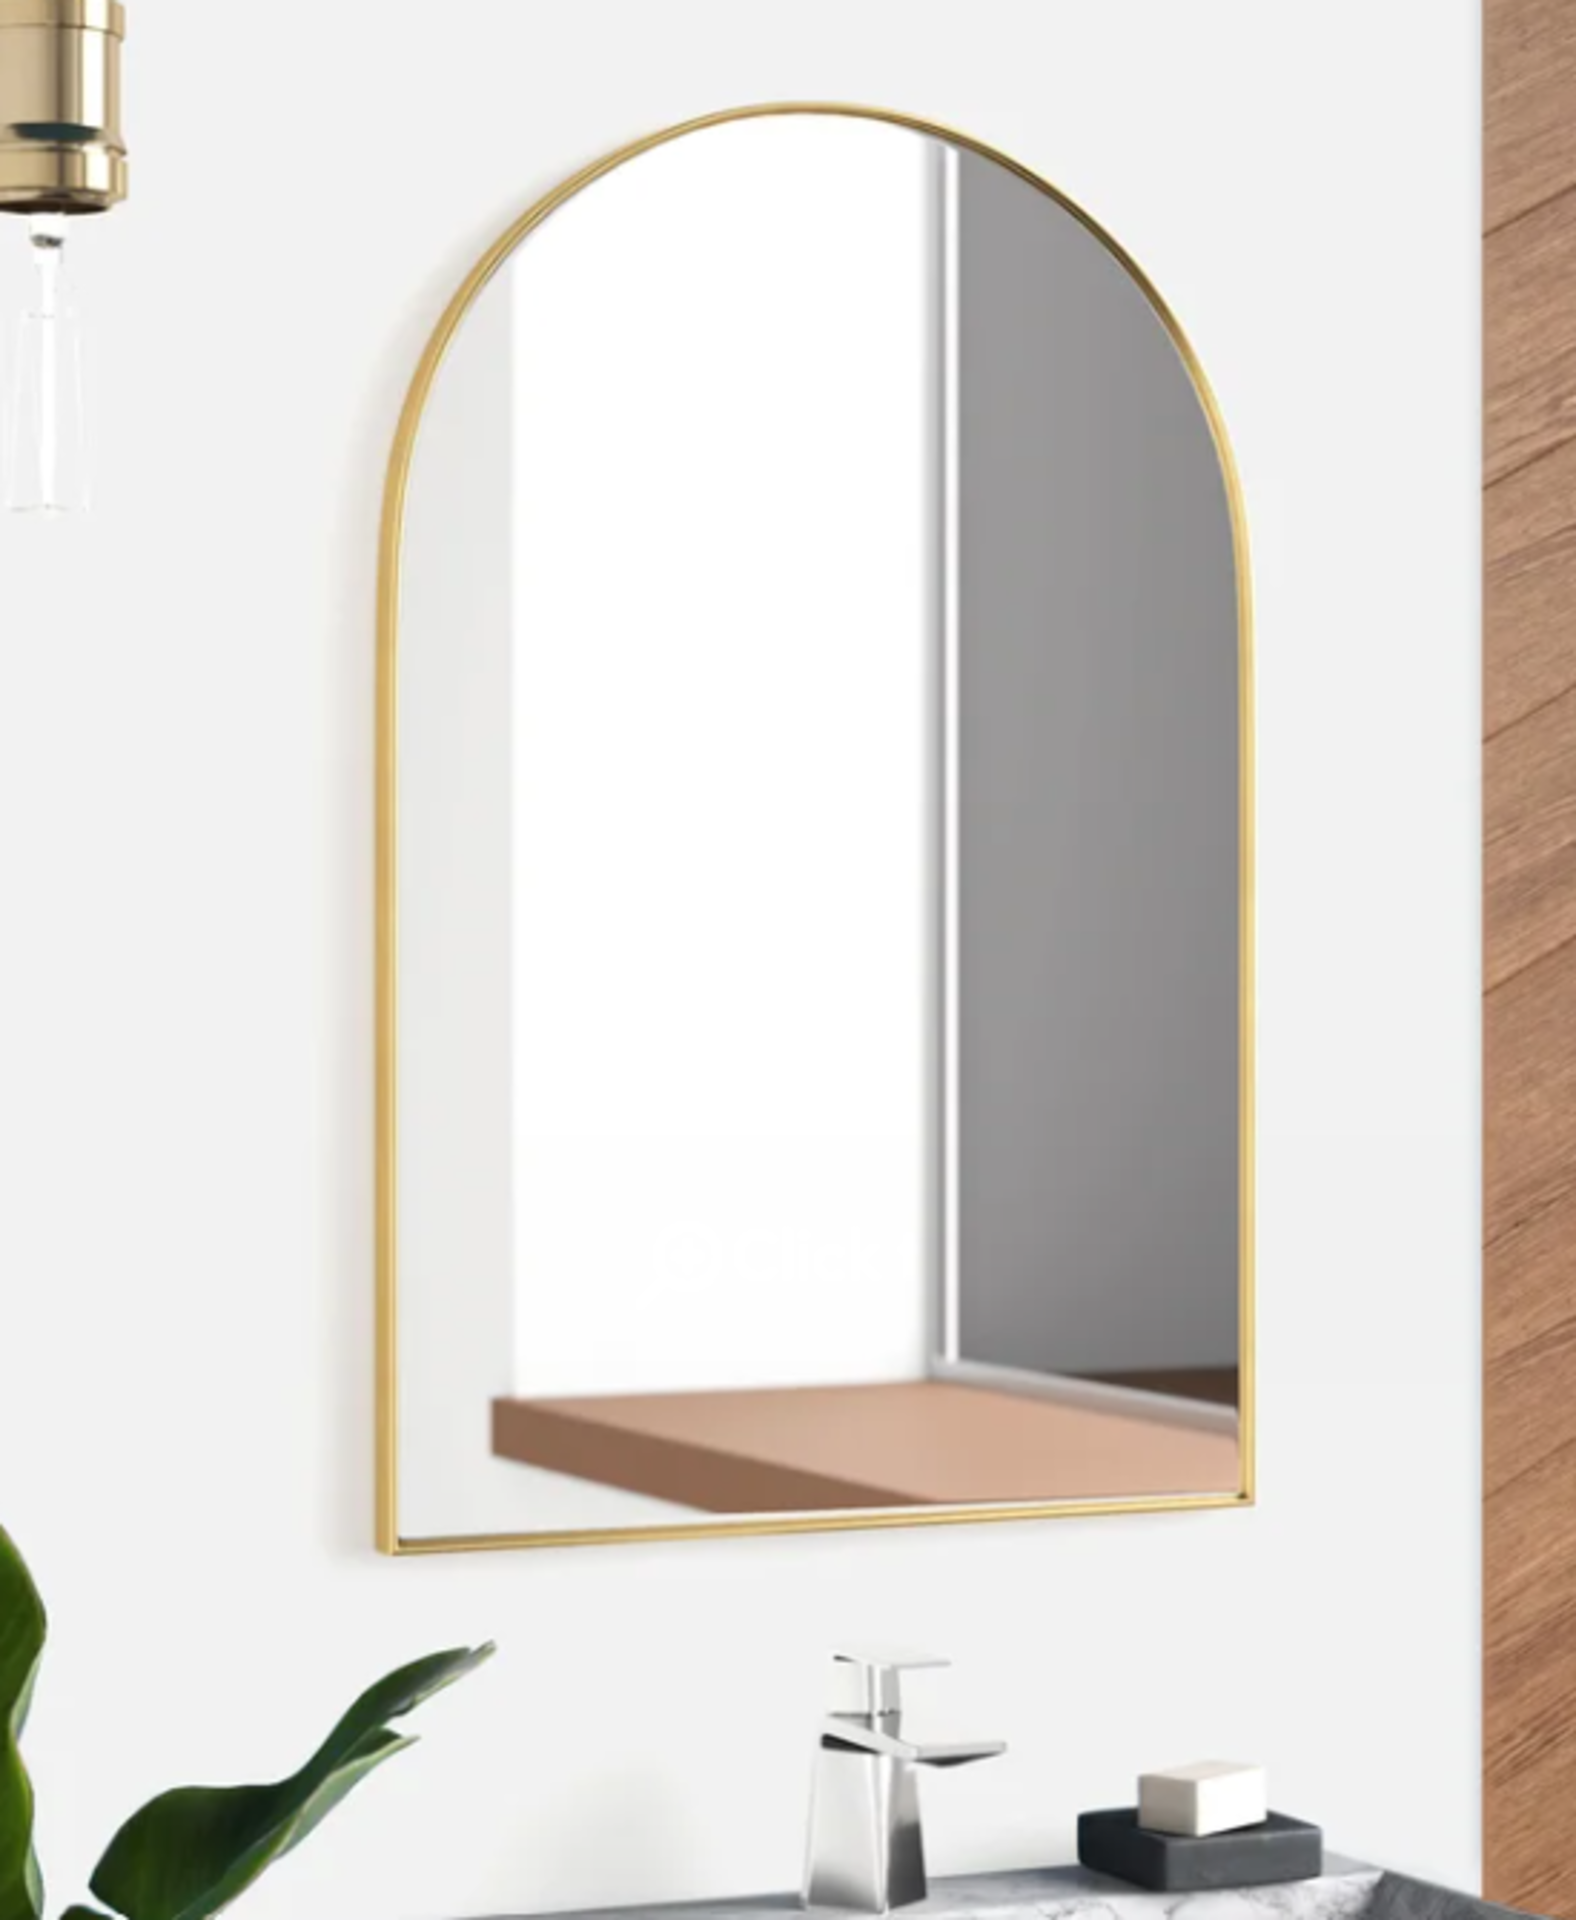 Mcfarren Arch Metal Wall Mirror. The striking elegance, simple design, and arch shape of this